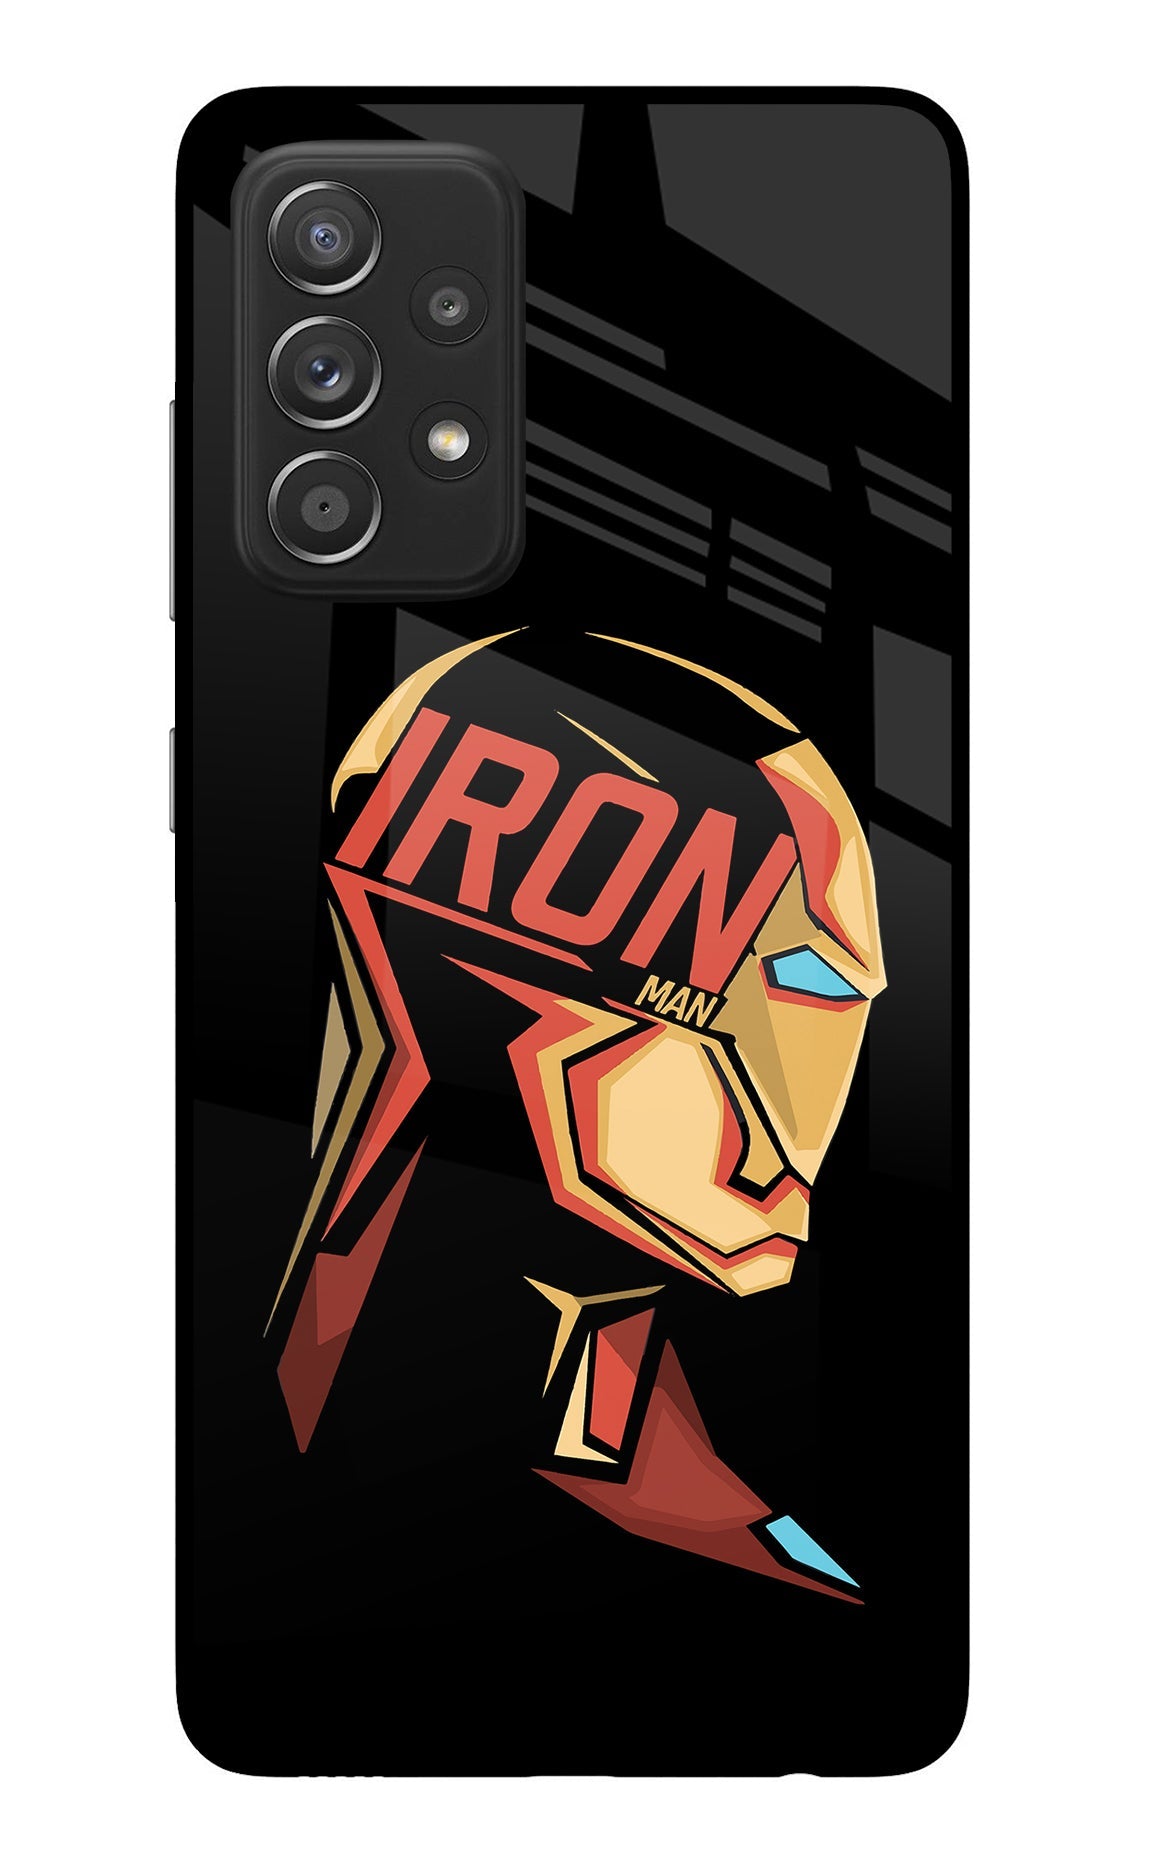 IronMan Samsung A52/A52s 5G Back Cover